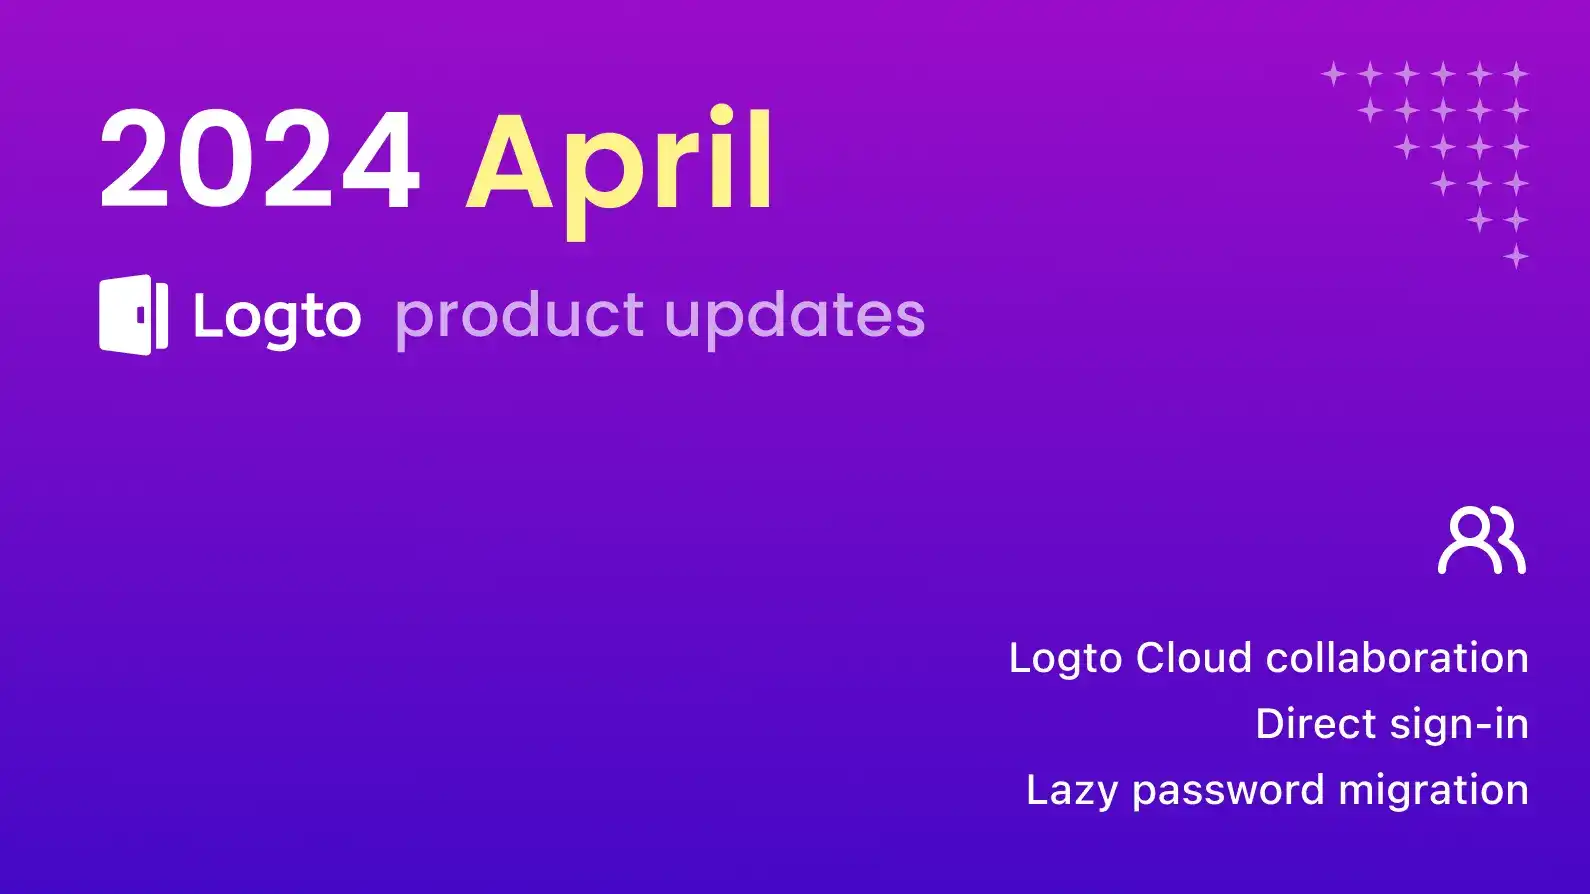 Logto product update: Cloud collaboration, direct sign-in, lazy password migration, and more